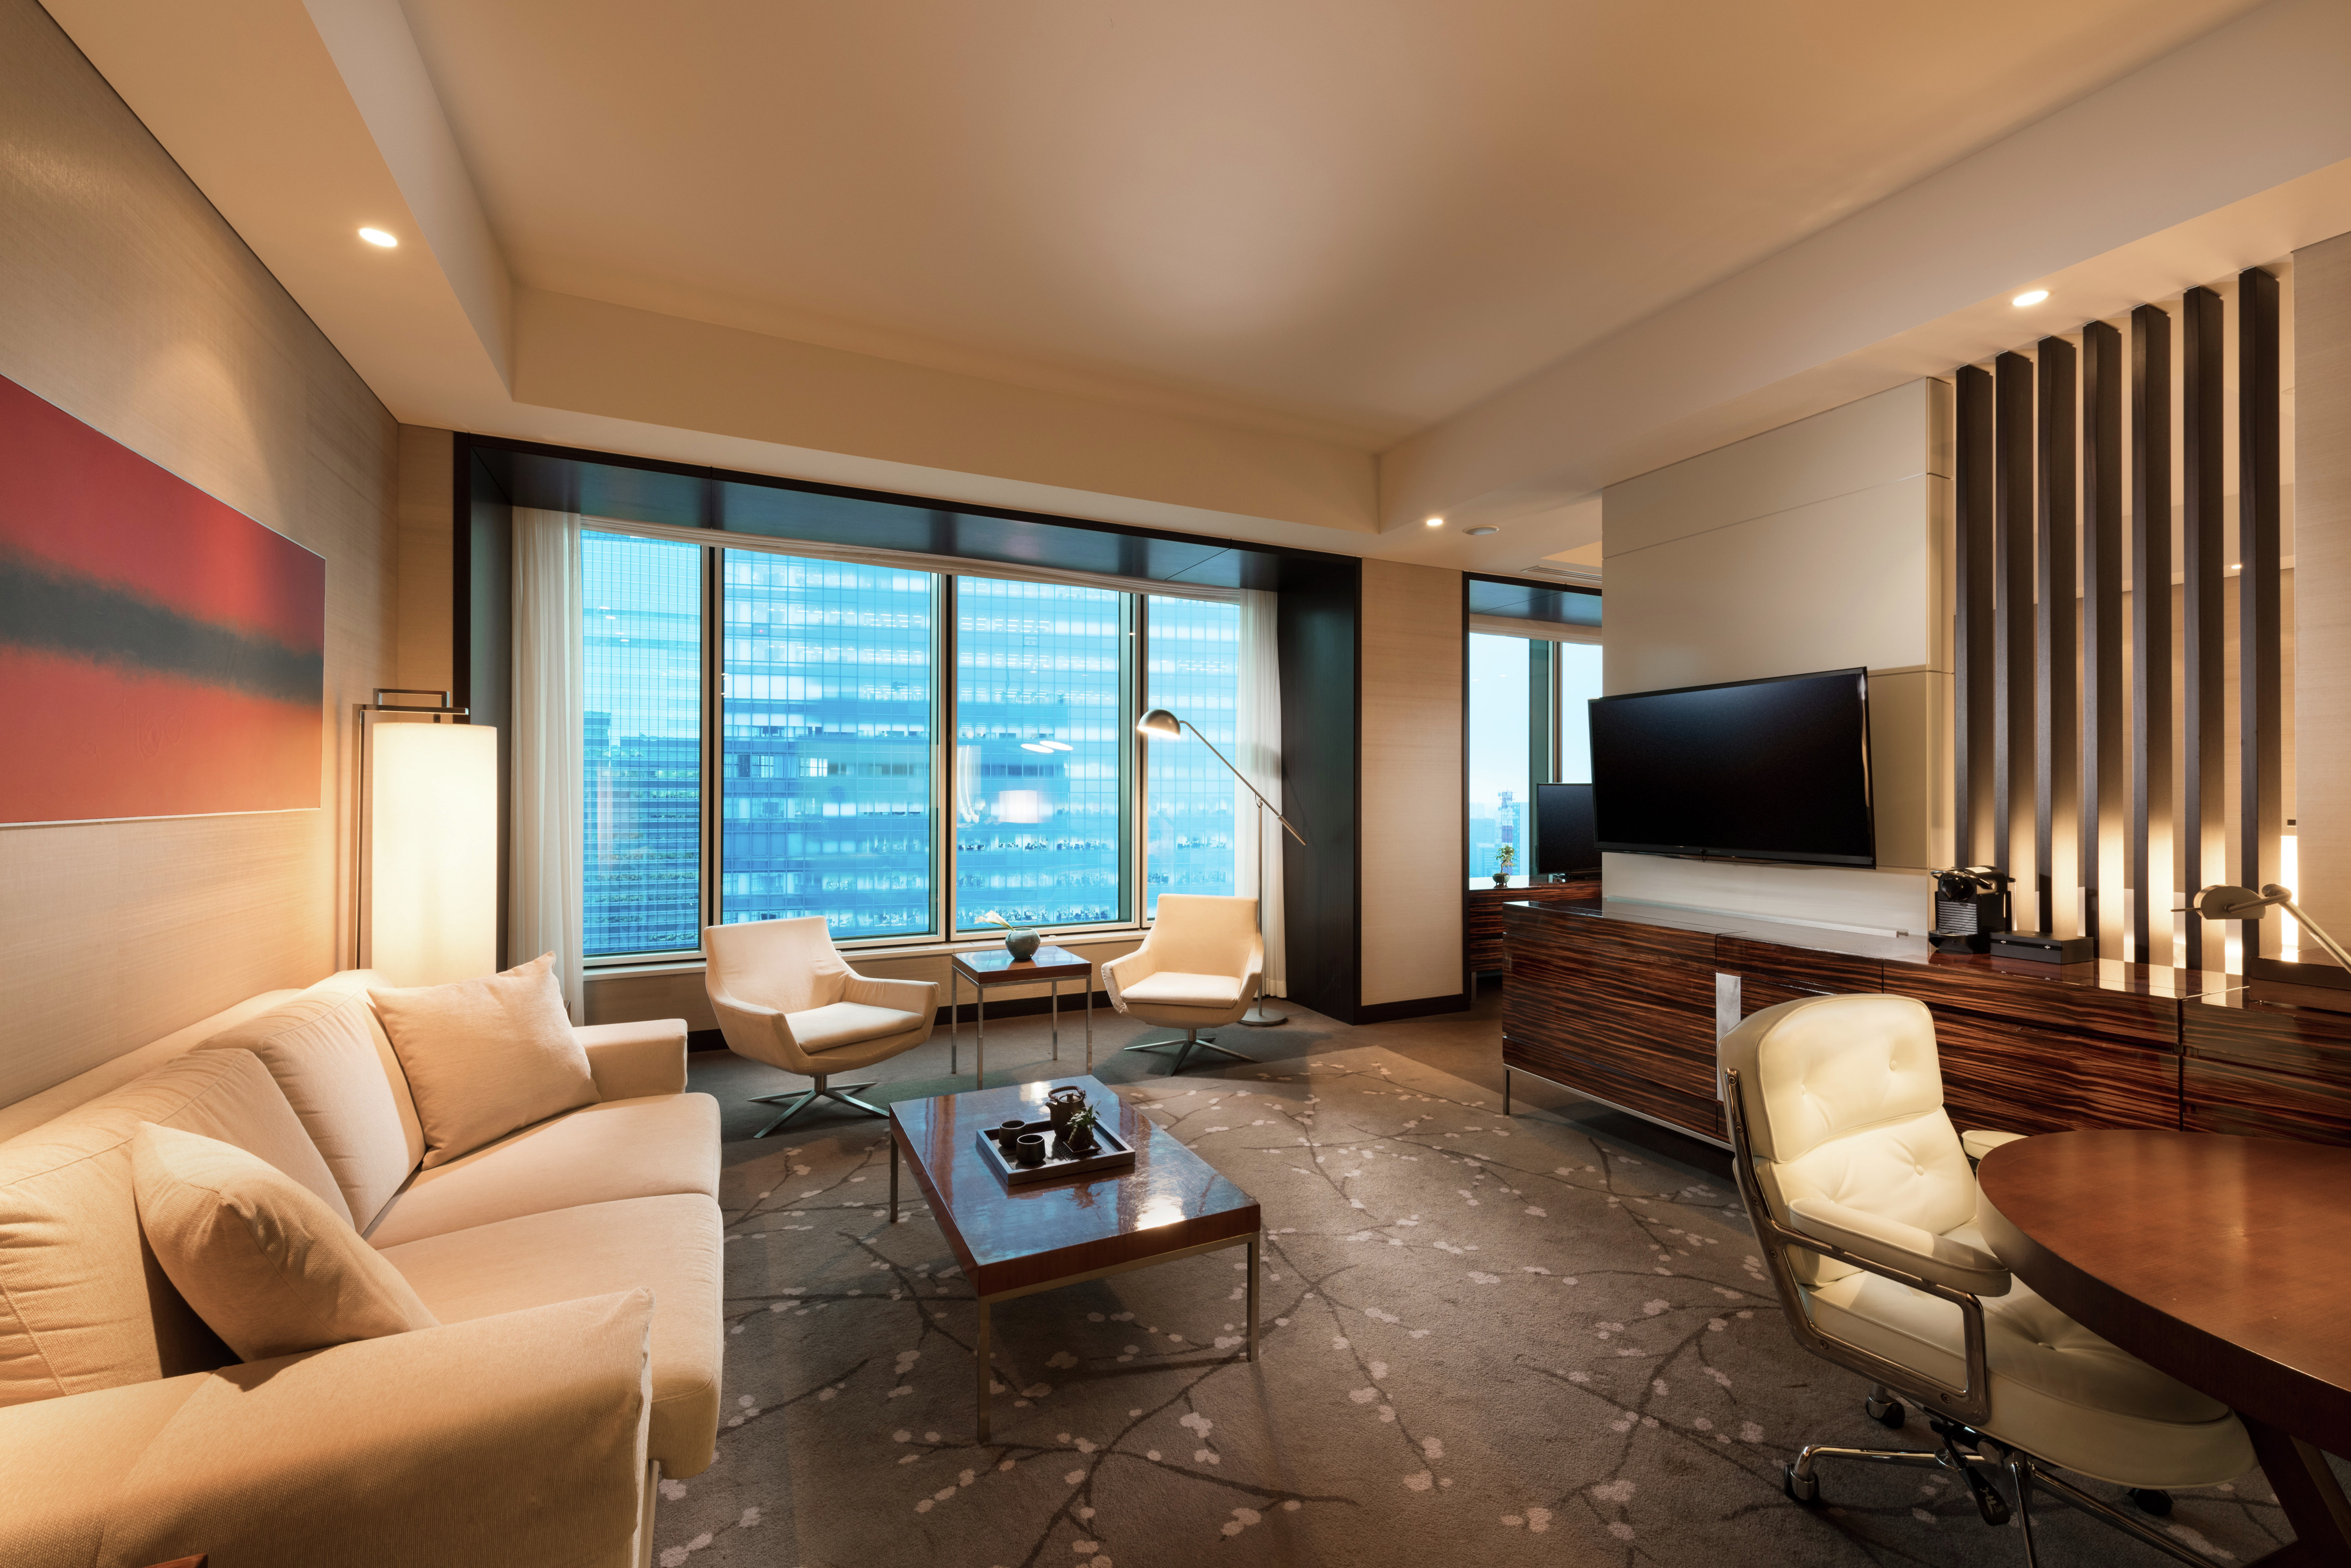 Living area in suite, with table and comfortable chairs